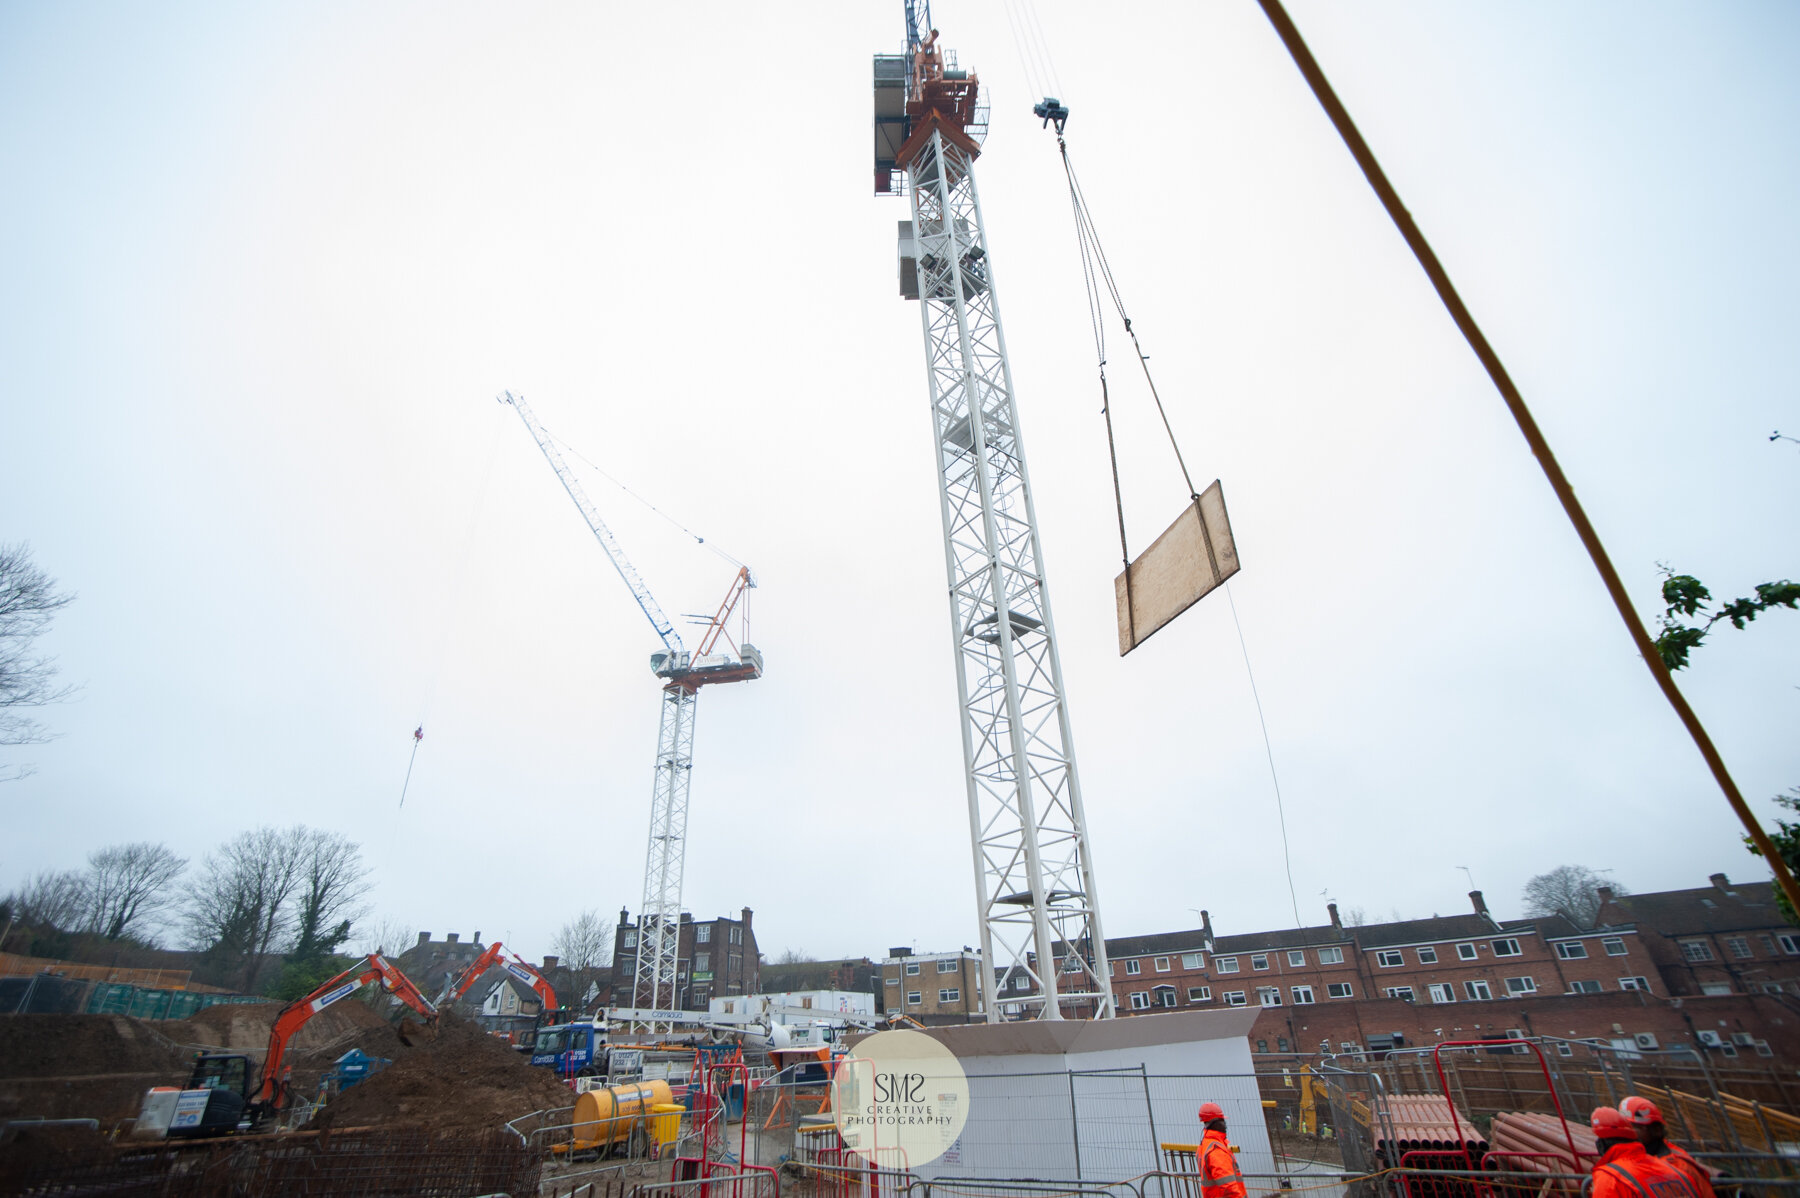  The two tower cranes work together to save time moving materials accross the site. 